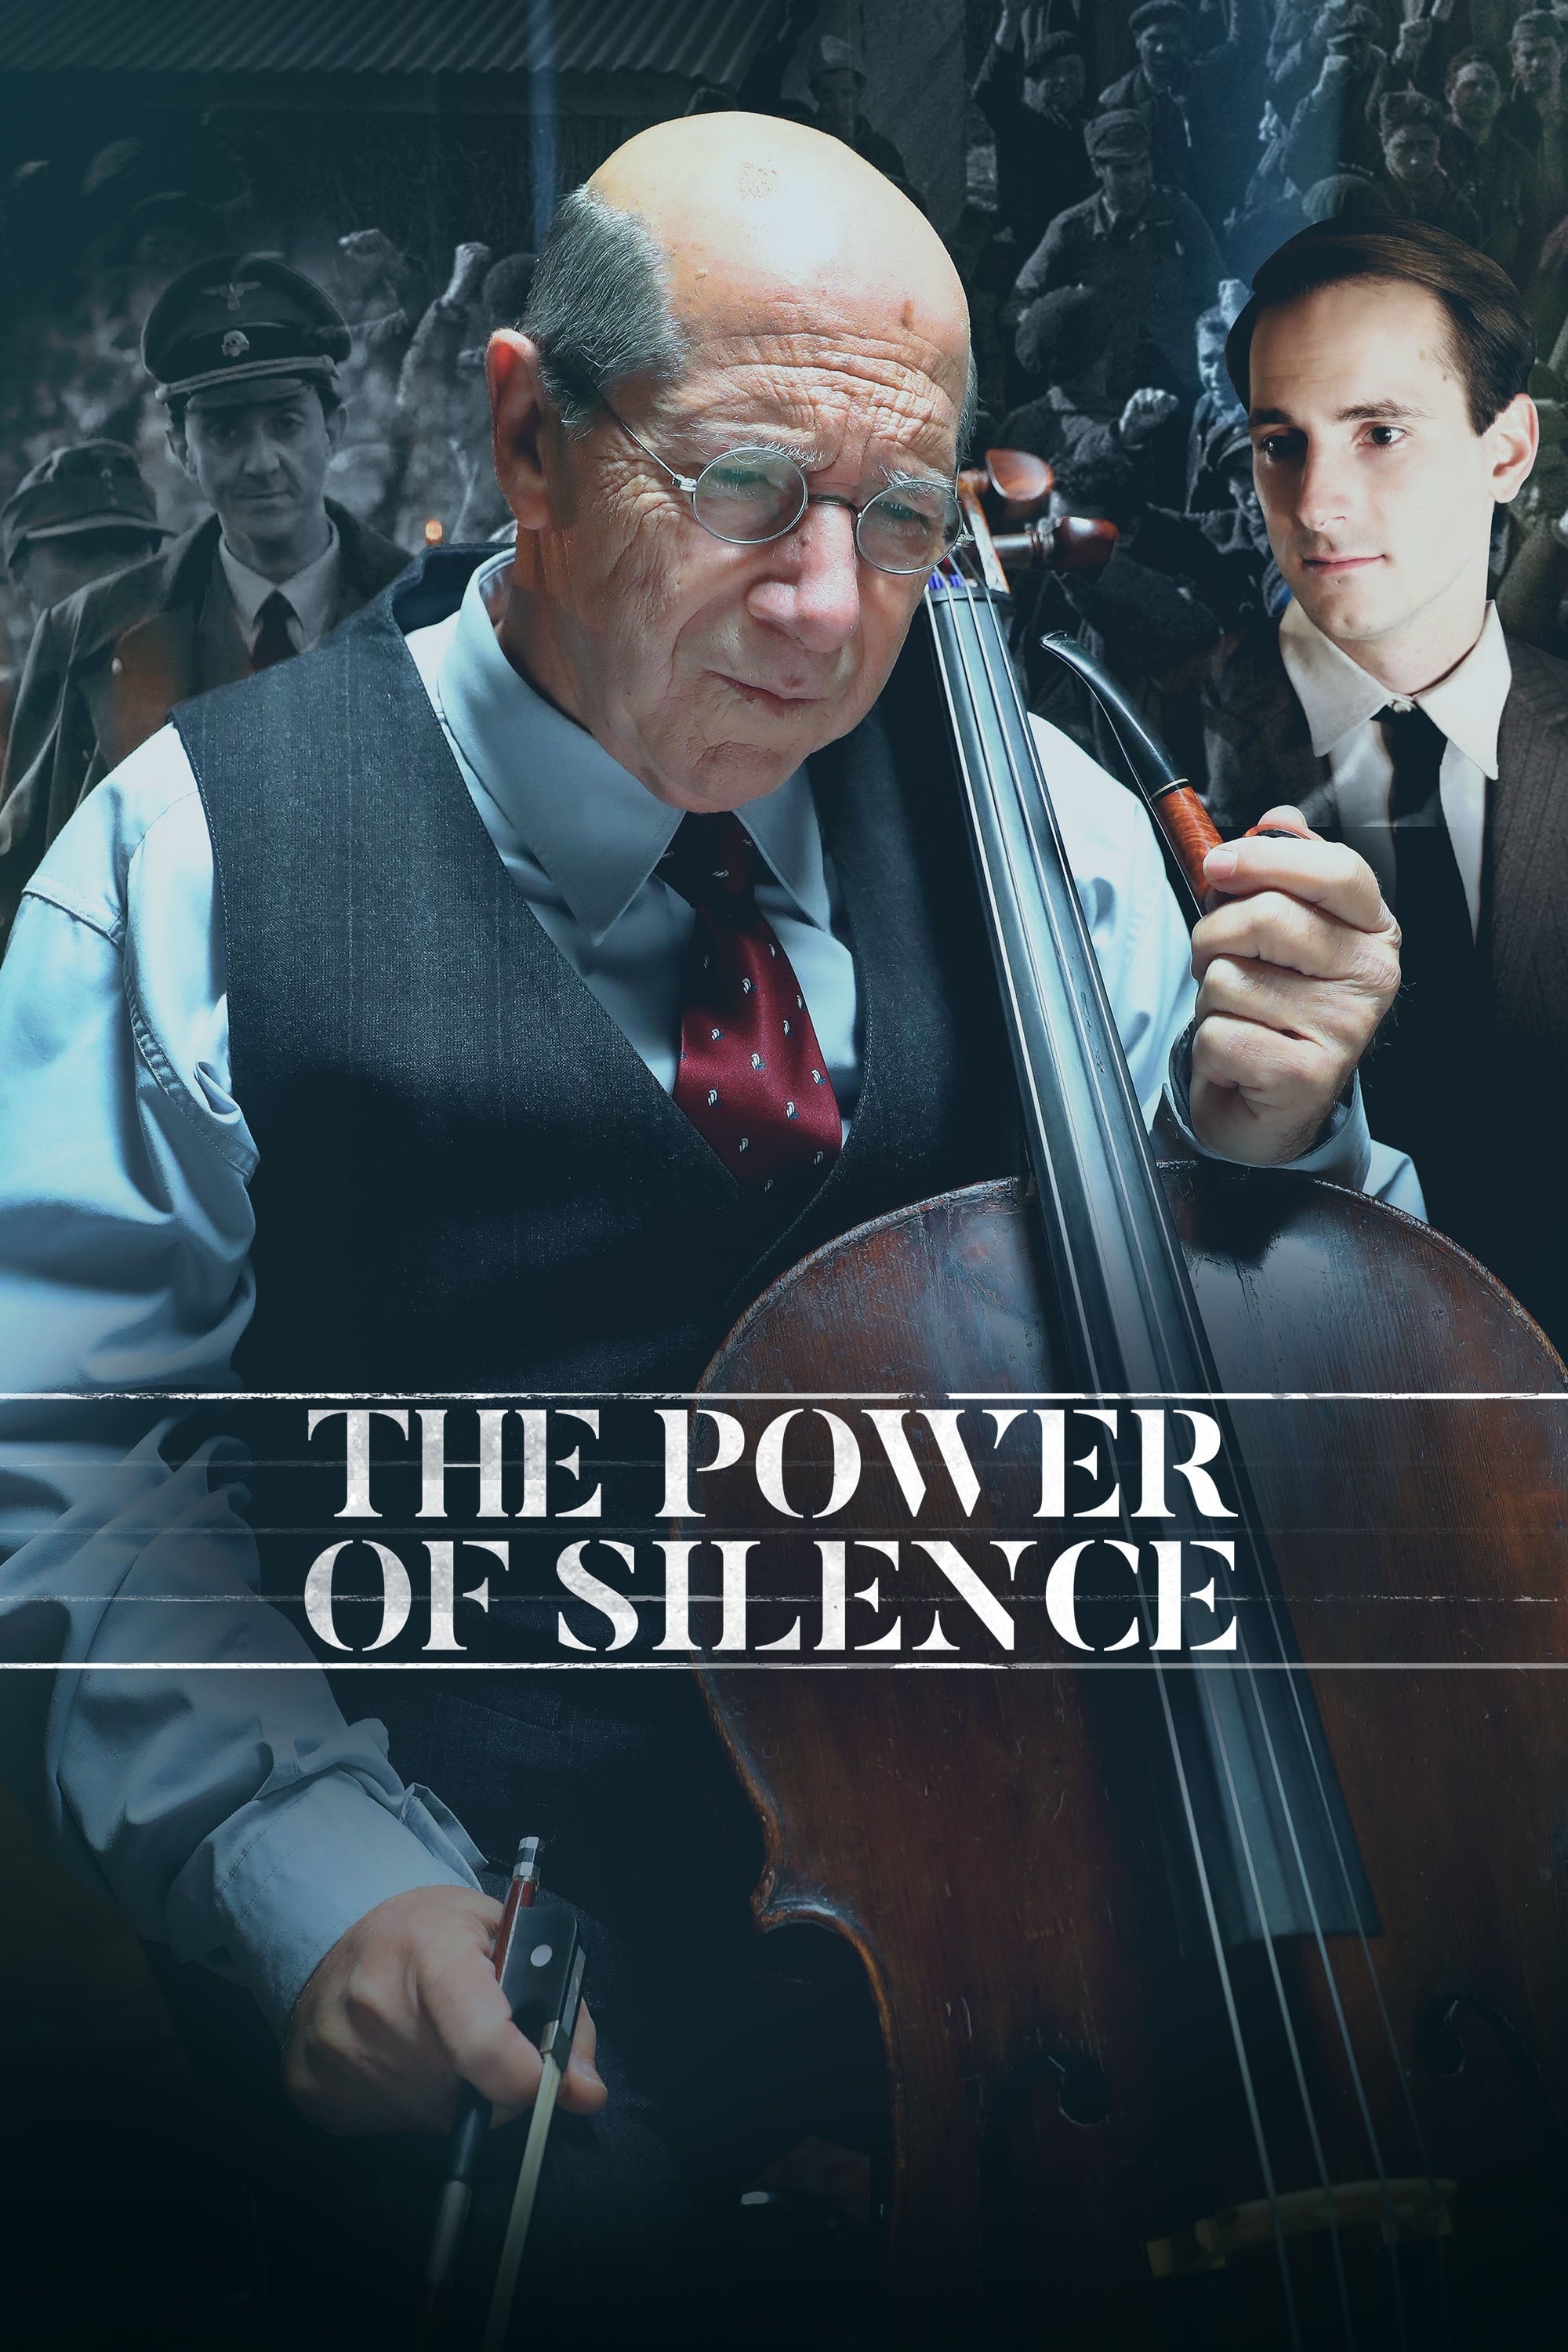 The Power of Silence (2017)